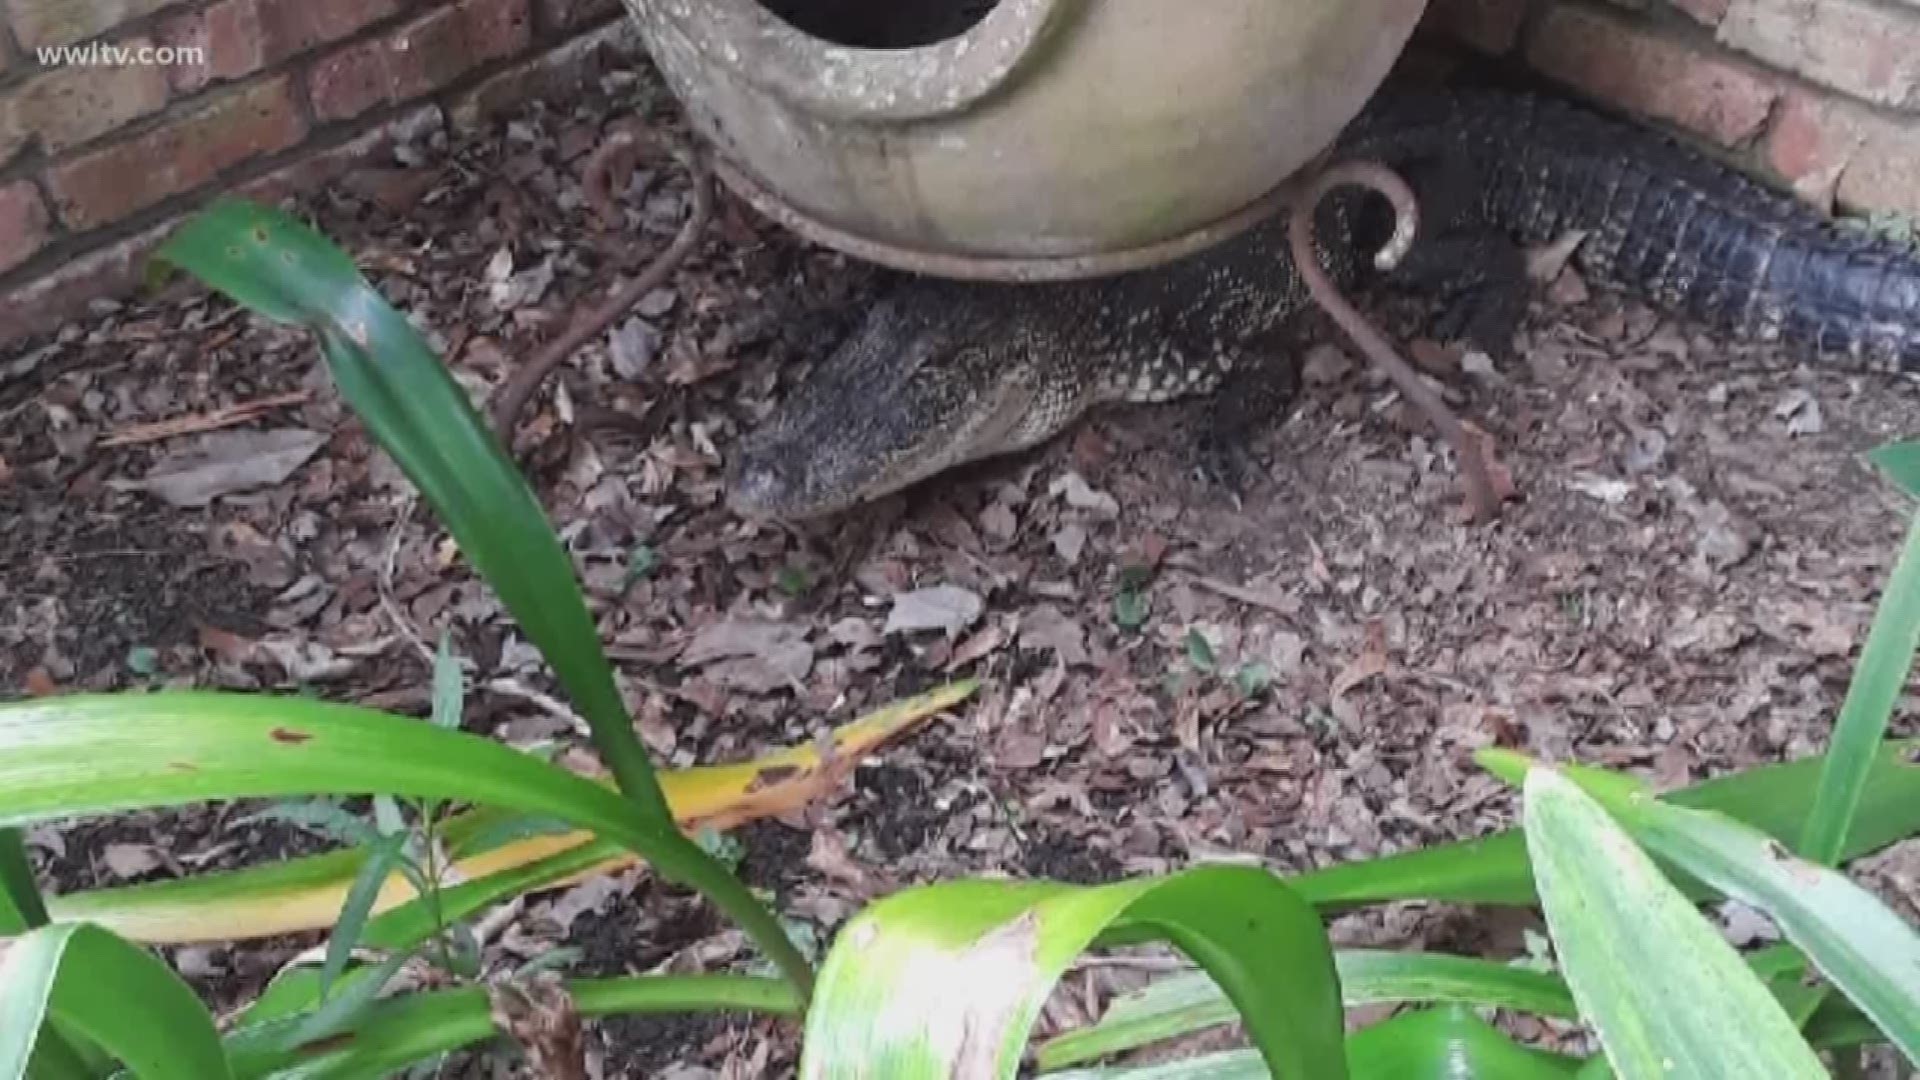 The deputy was helping animal control remove the alligator from a home when it broke free.